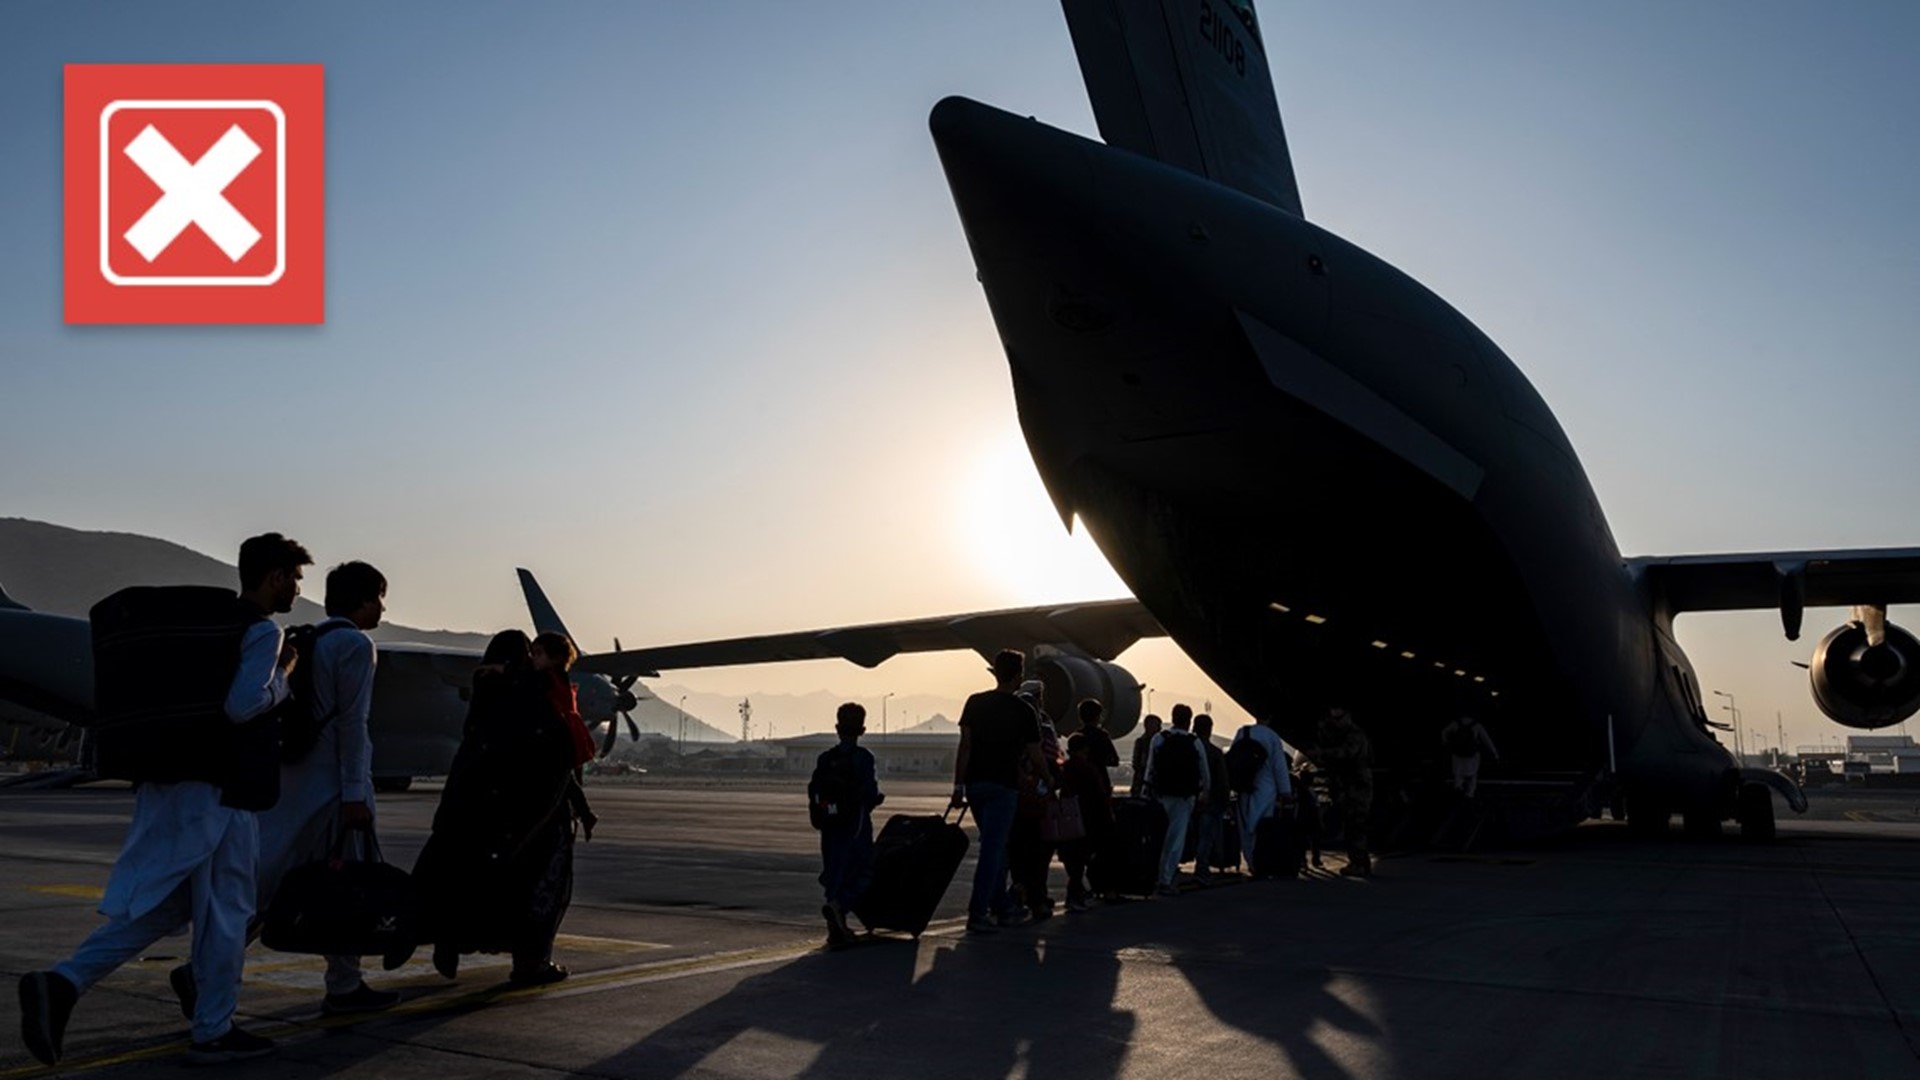 While the U.S. typically charges for government-chartered flights, a spokesperson said the State Department has not charged Americans evacuating Afghanistan.